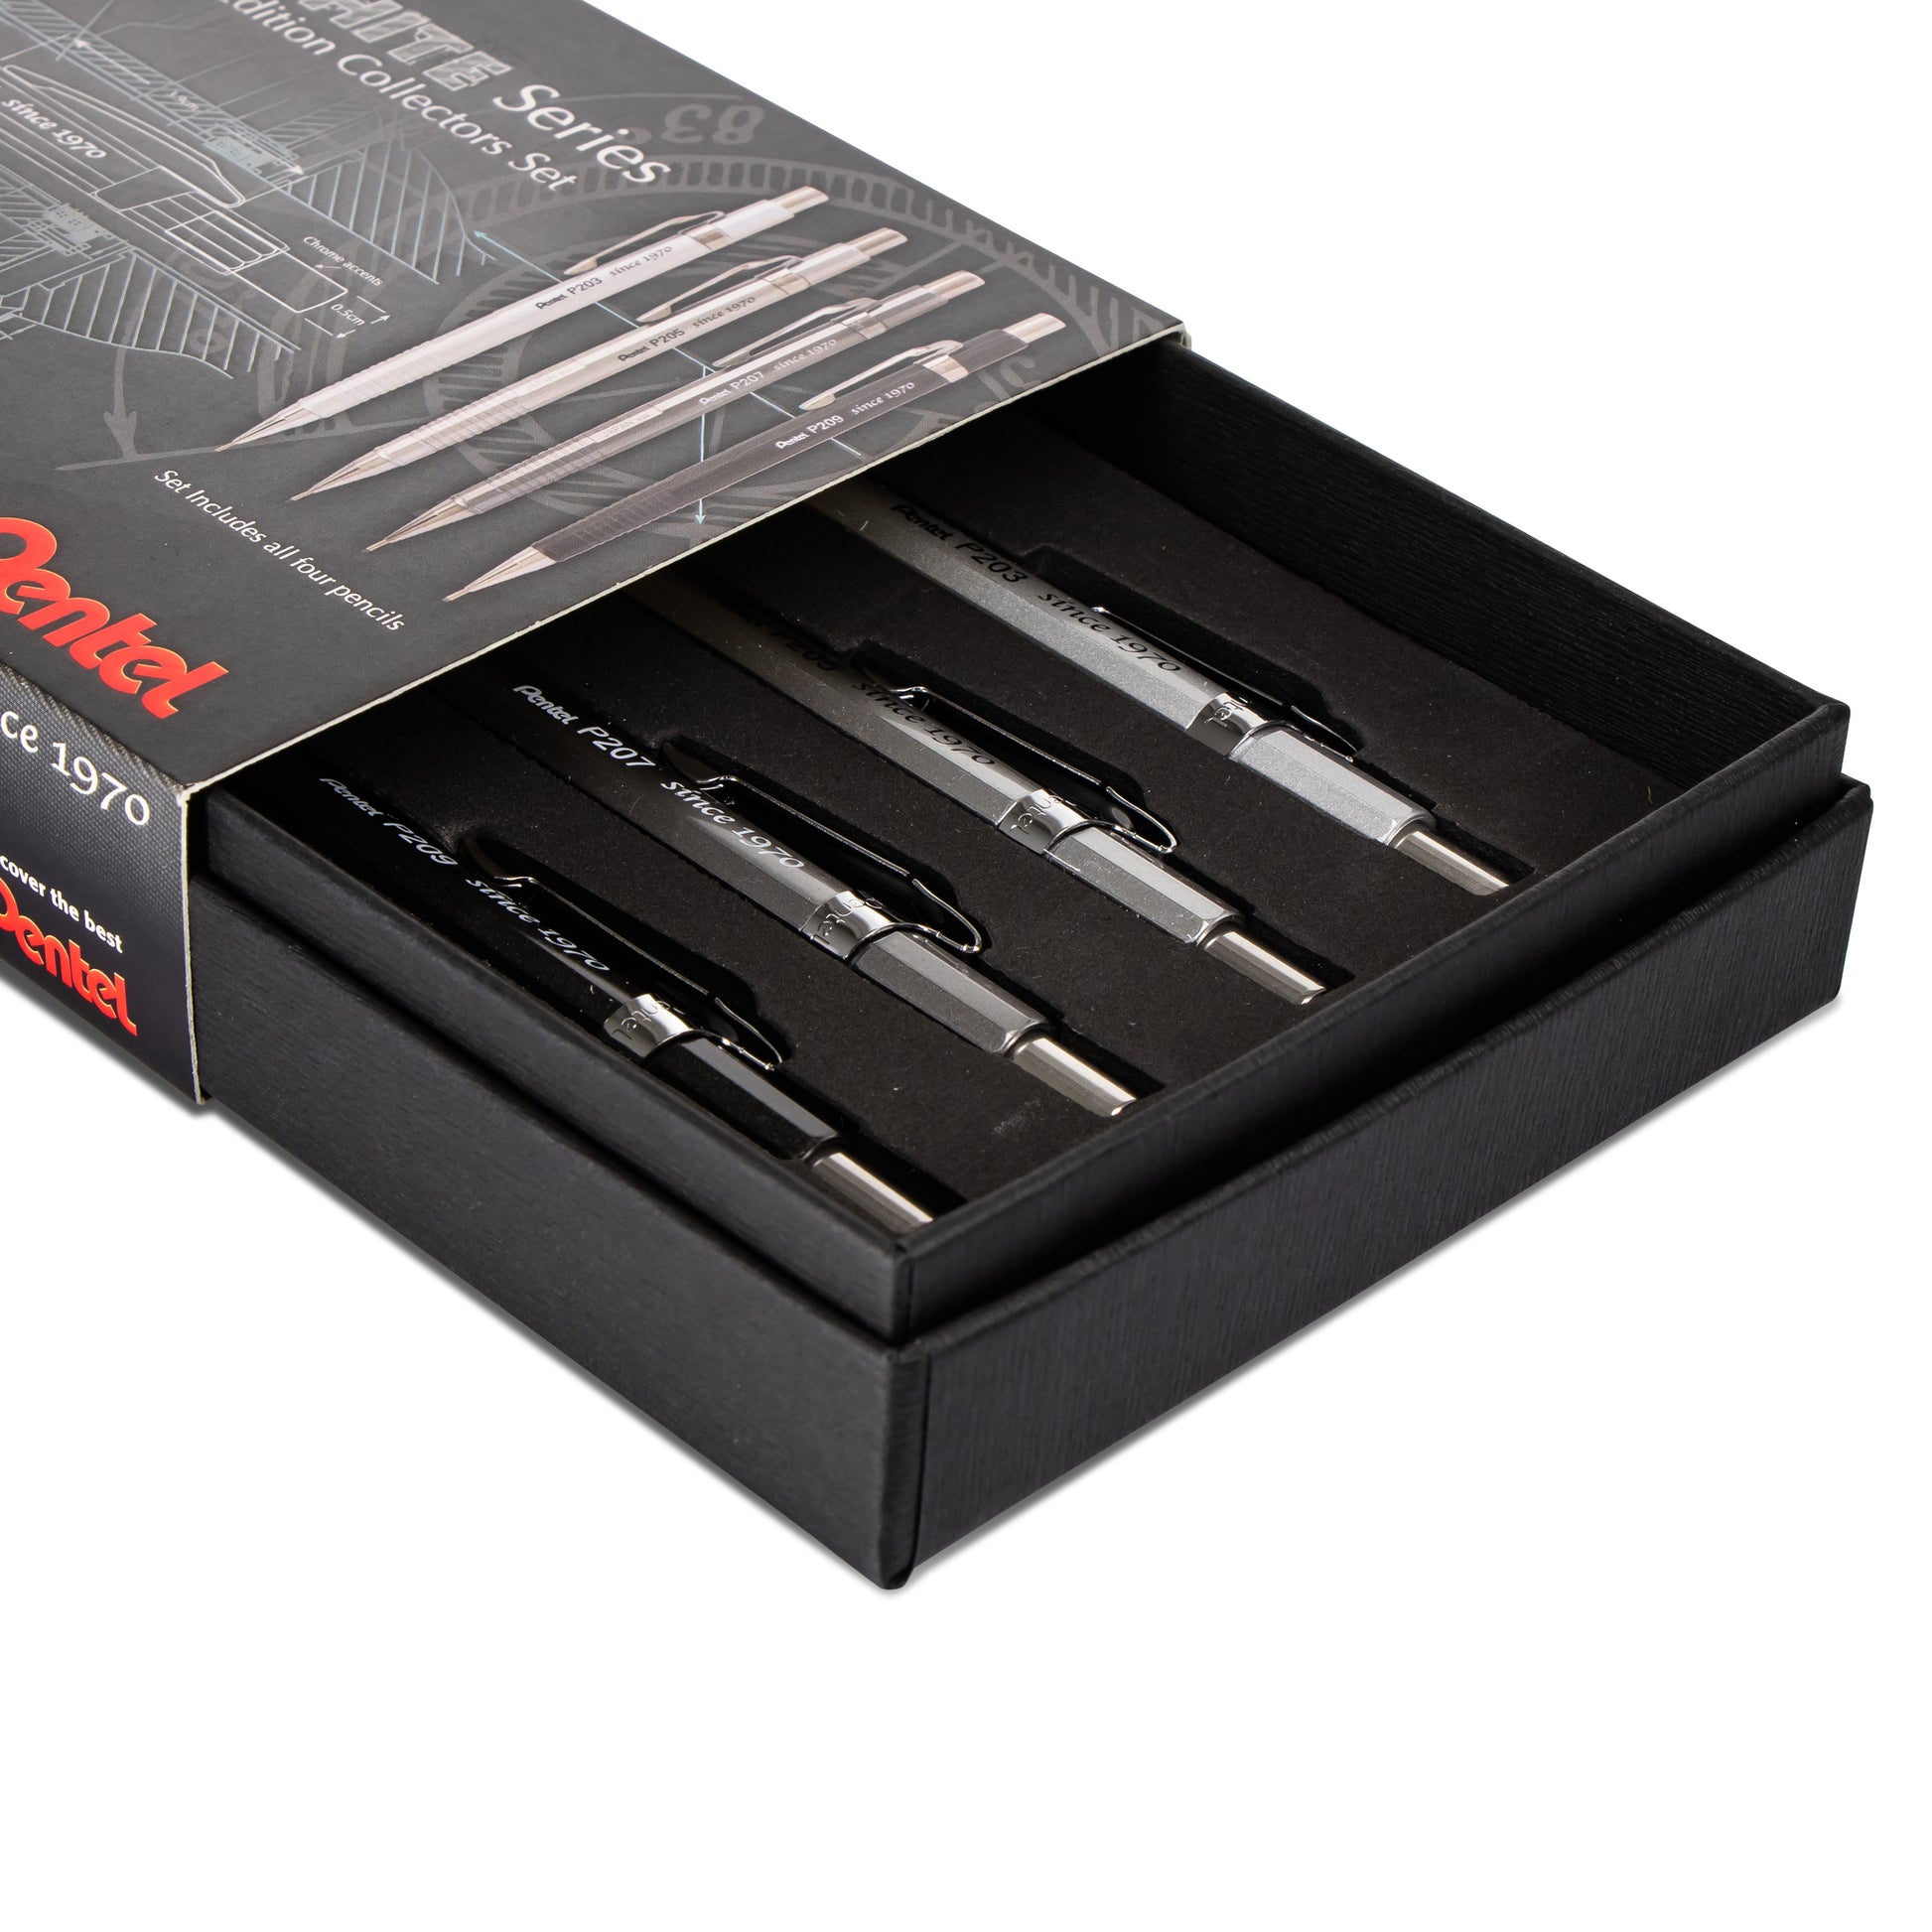 Active Key Organiser - Graphite Special Edition